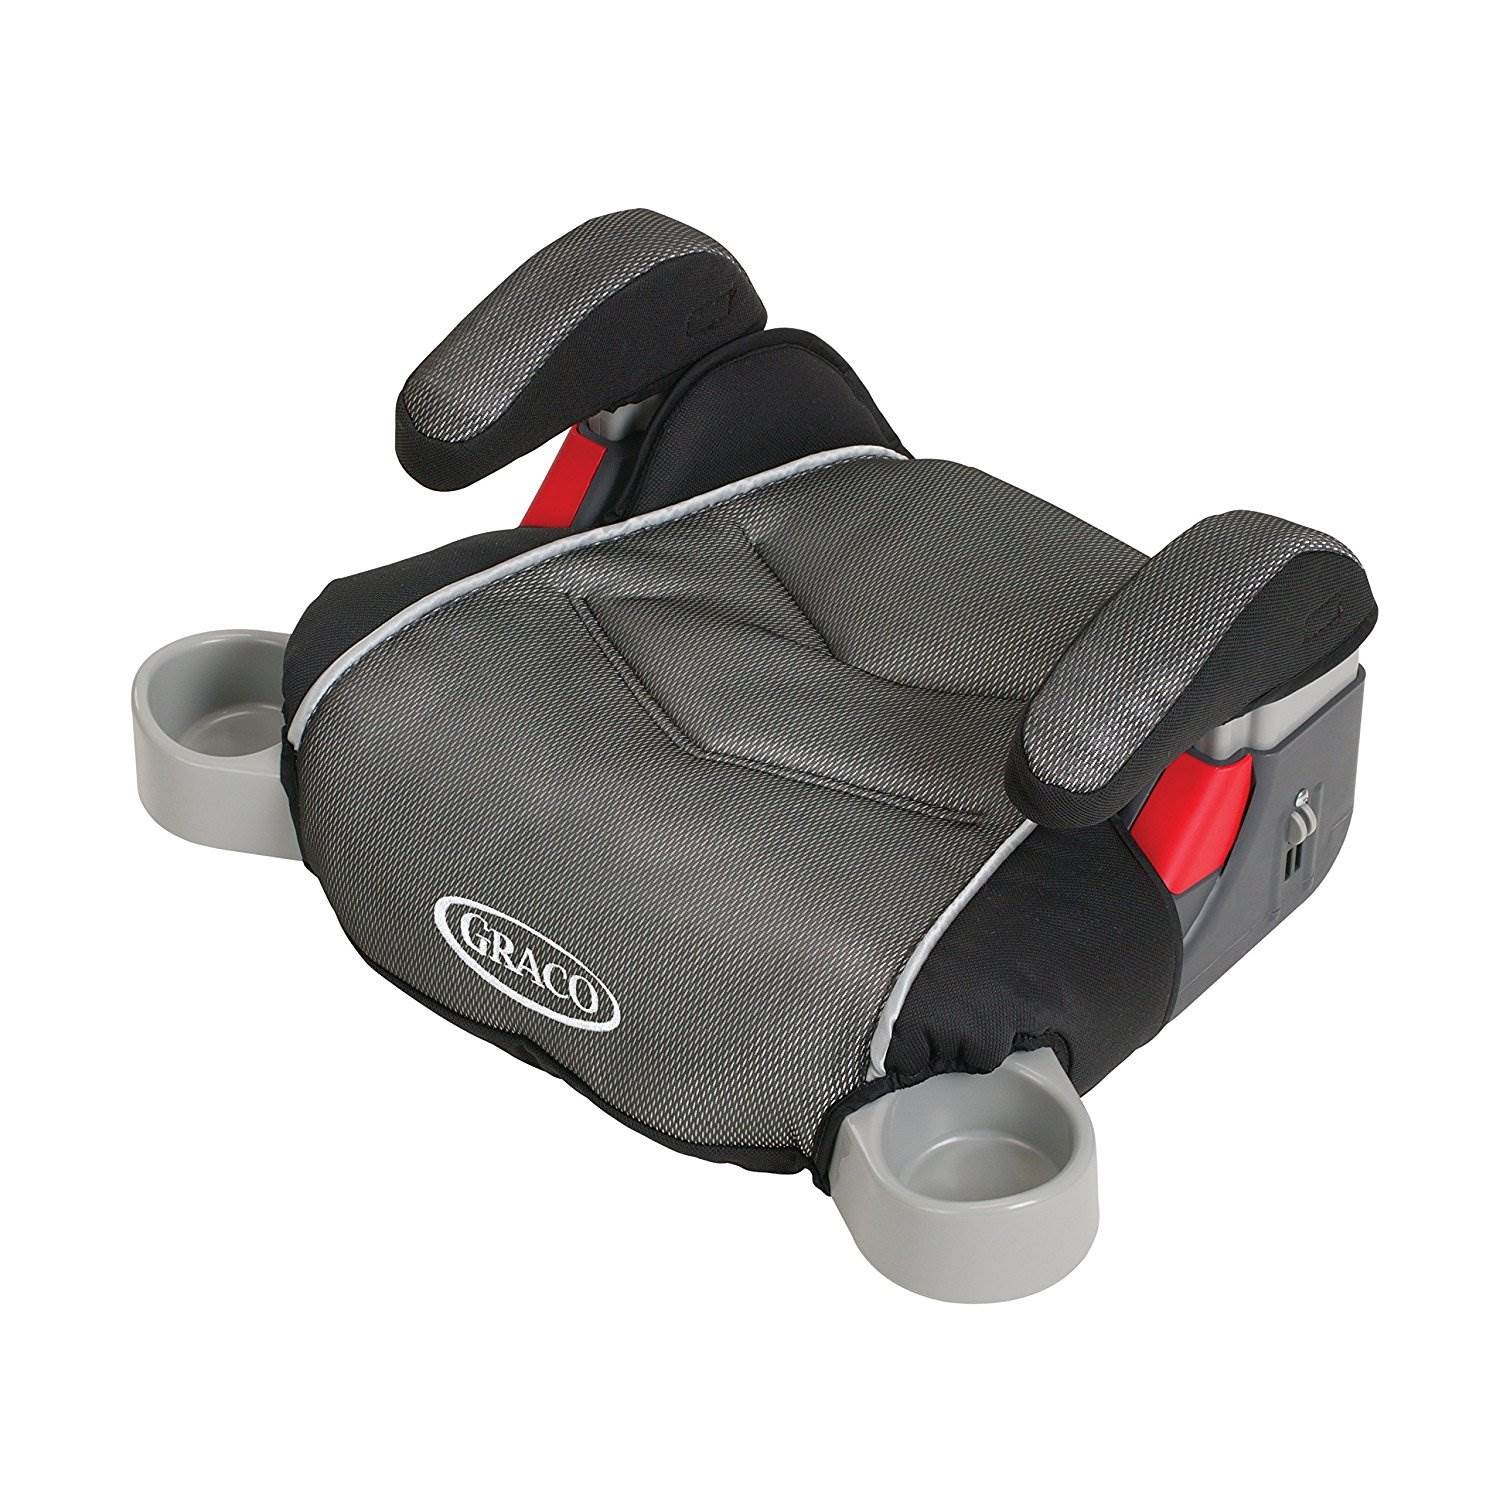 Graco Turbobooster Backless Forward Facing Booster Car Seat, Galaxy - image 1 of 5